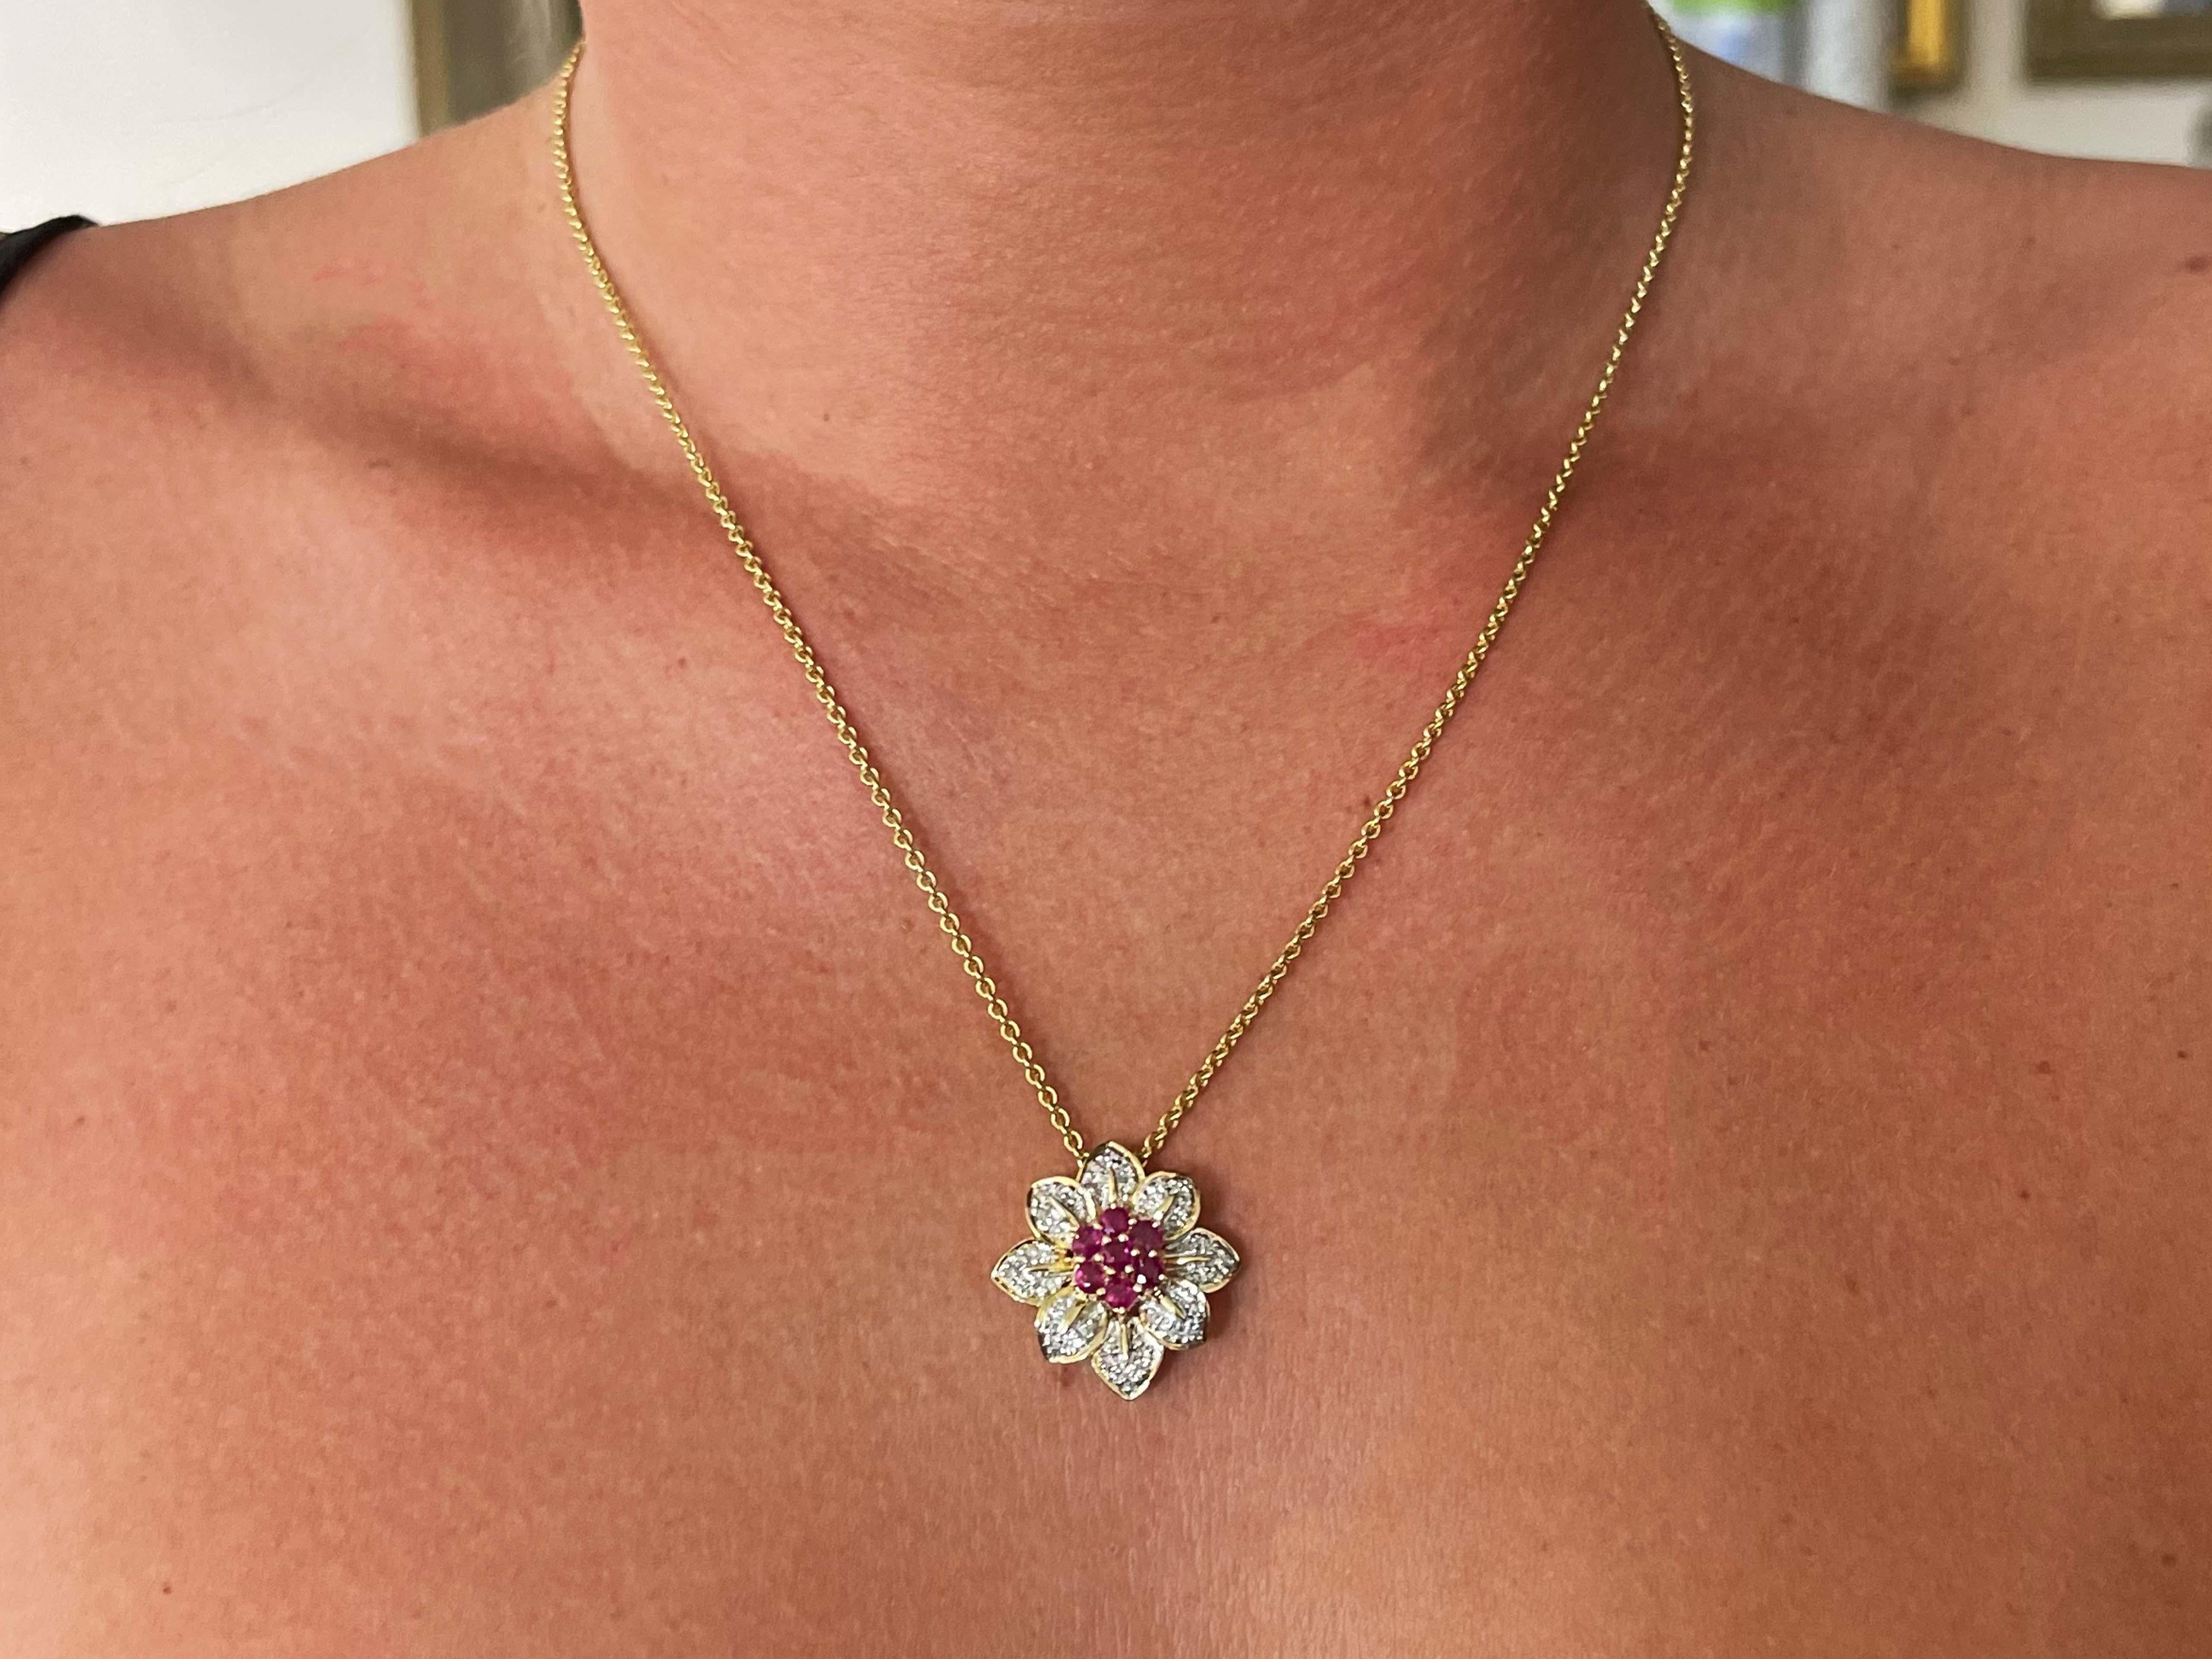 Ruby and Diamond Flower Necklace Solid 18k Yellow Gold
Item Specifications:

Necklace Metal: 18k Yellow Gold

Total Weight: 10.5 Grams

Chain Length: 20